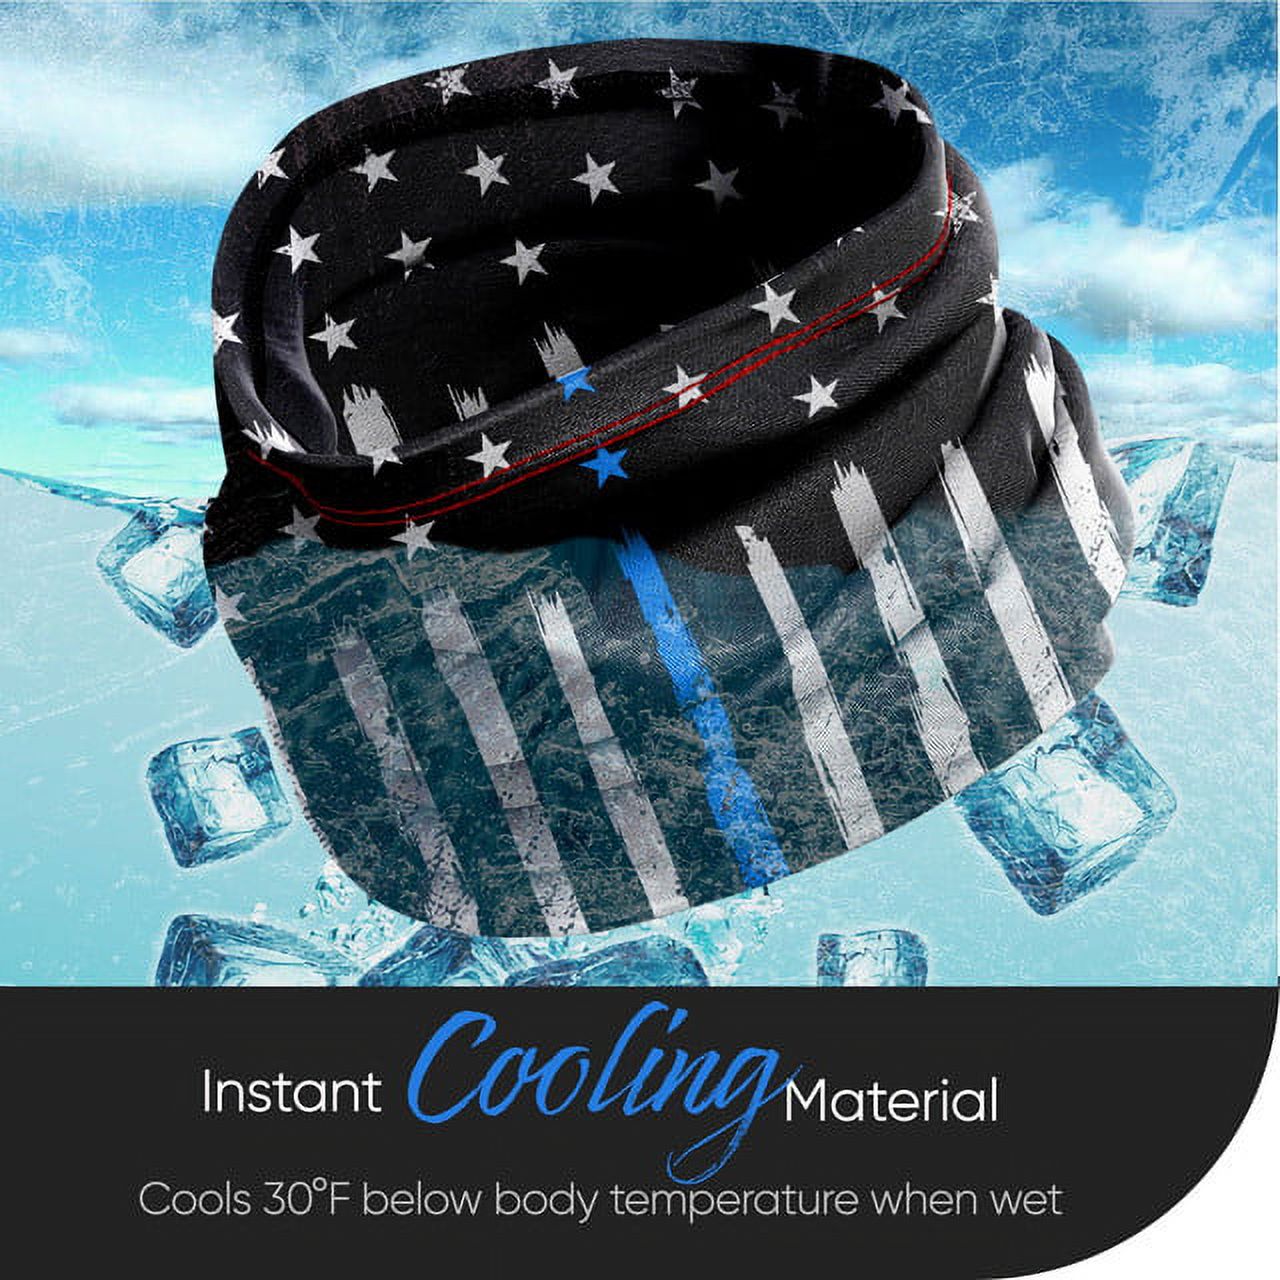 Millenti Neck Gaiter Tactical Breathable for Sun Protection Summer, Snowboard Neck Gaiter (USA Flag) Black-Blue-White, G06UWRBL - image 2 of 5